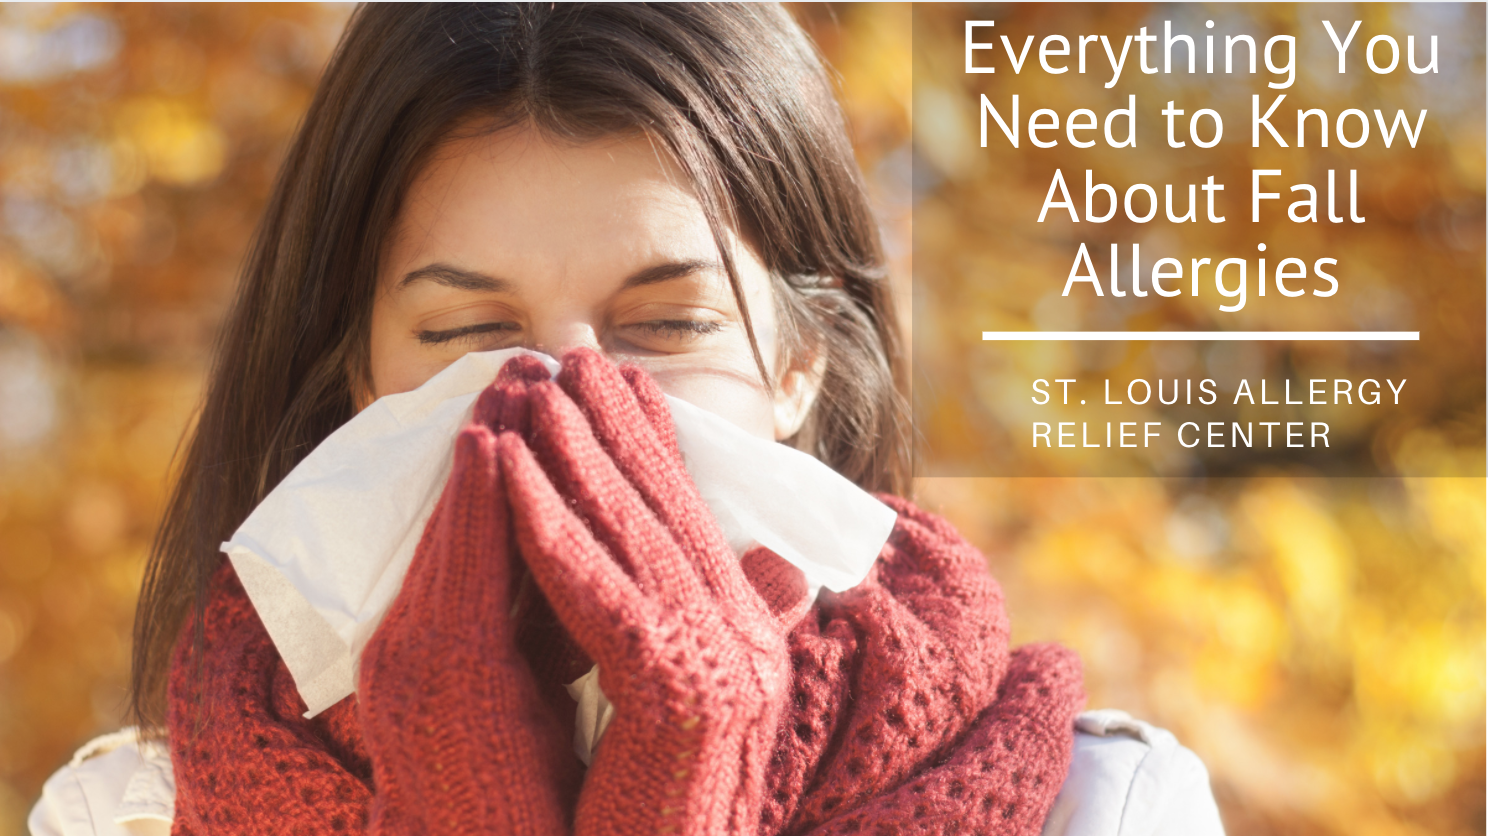 Everything You Need to Know About Fall Allergies St. Louis Allergy Relief